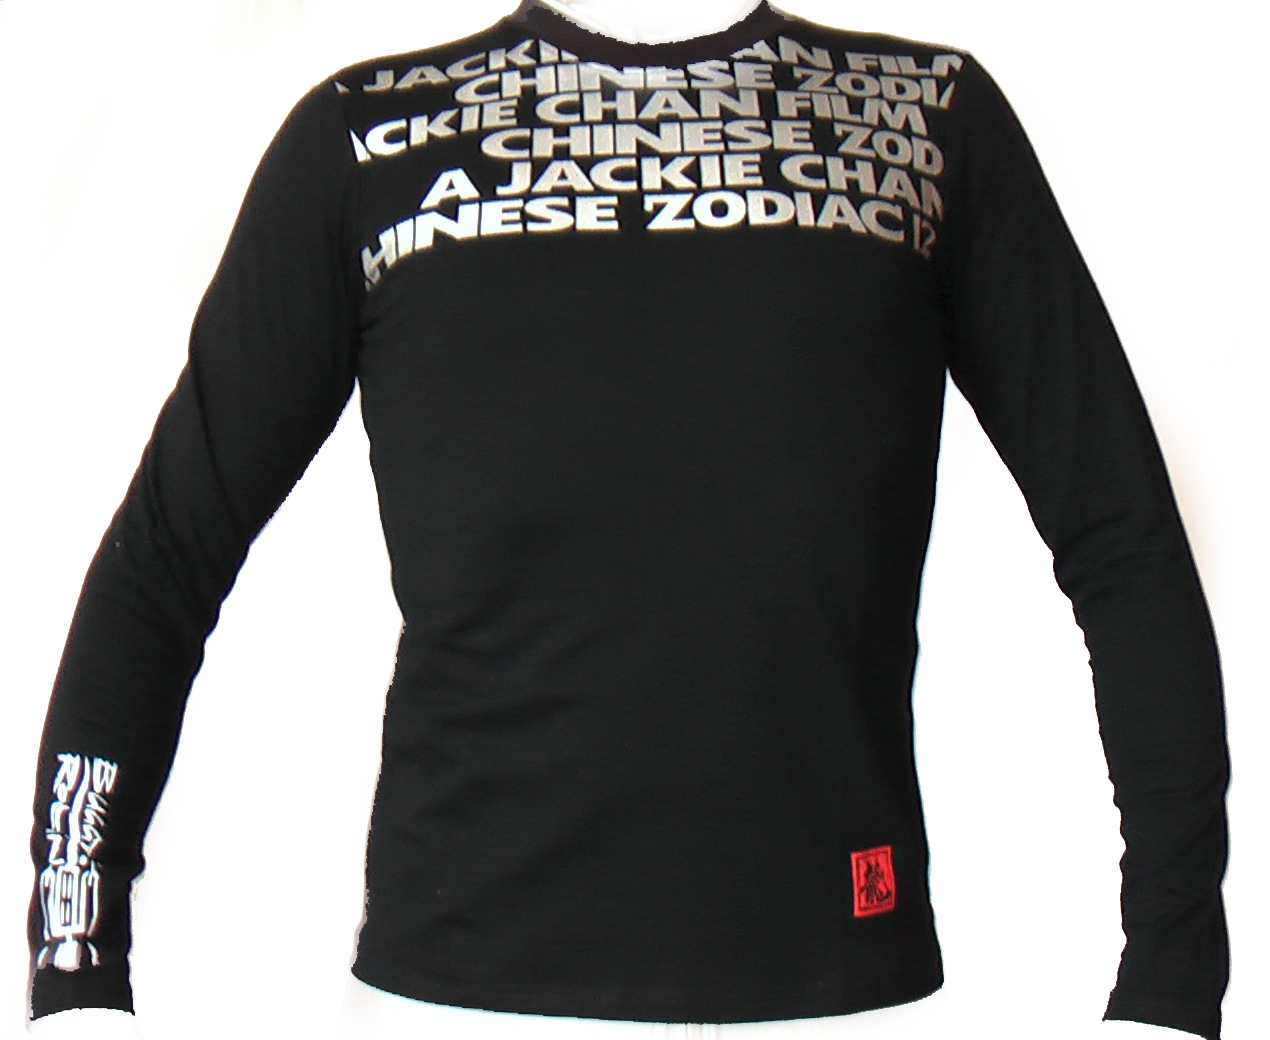 long sleeve black slim T-shirt, front side, printed jackie chan chinese zodiac in silver near the shoulder